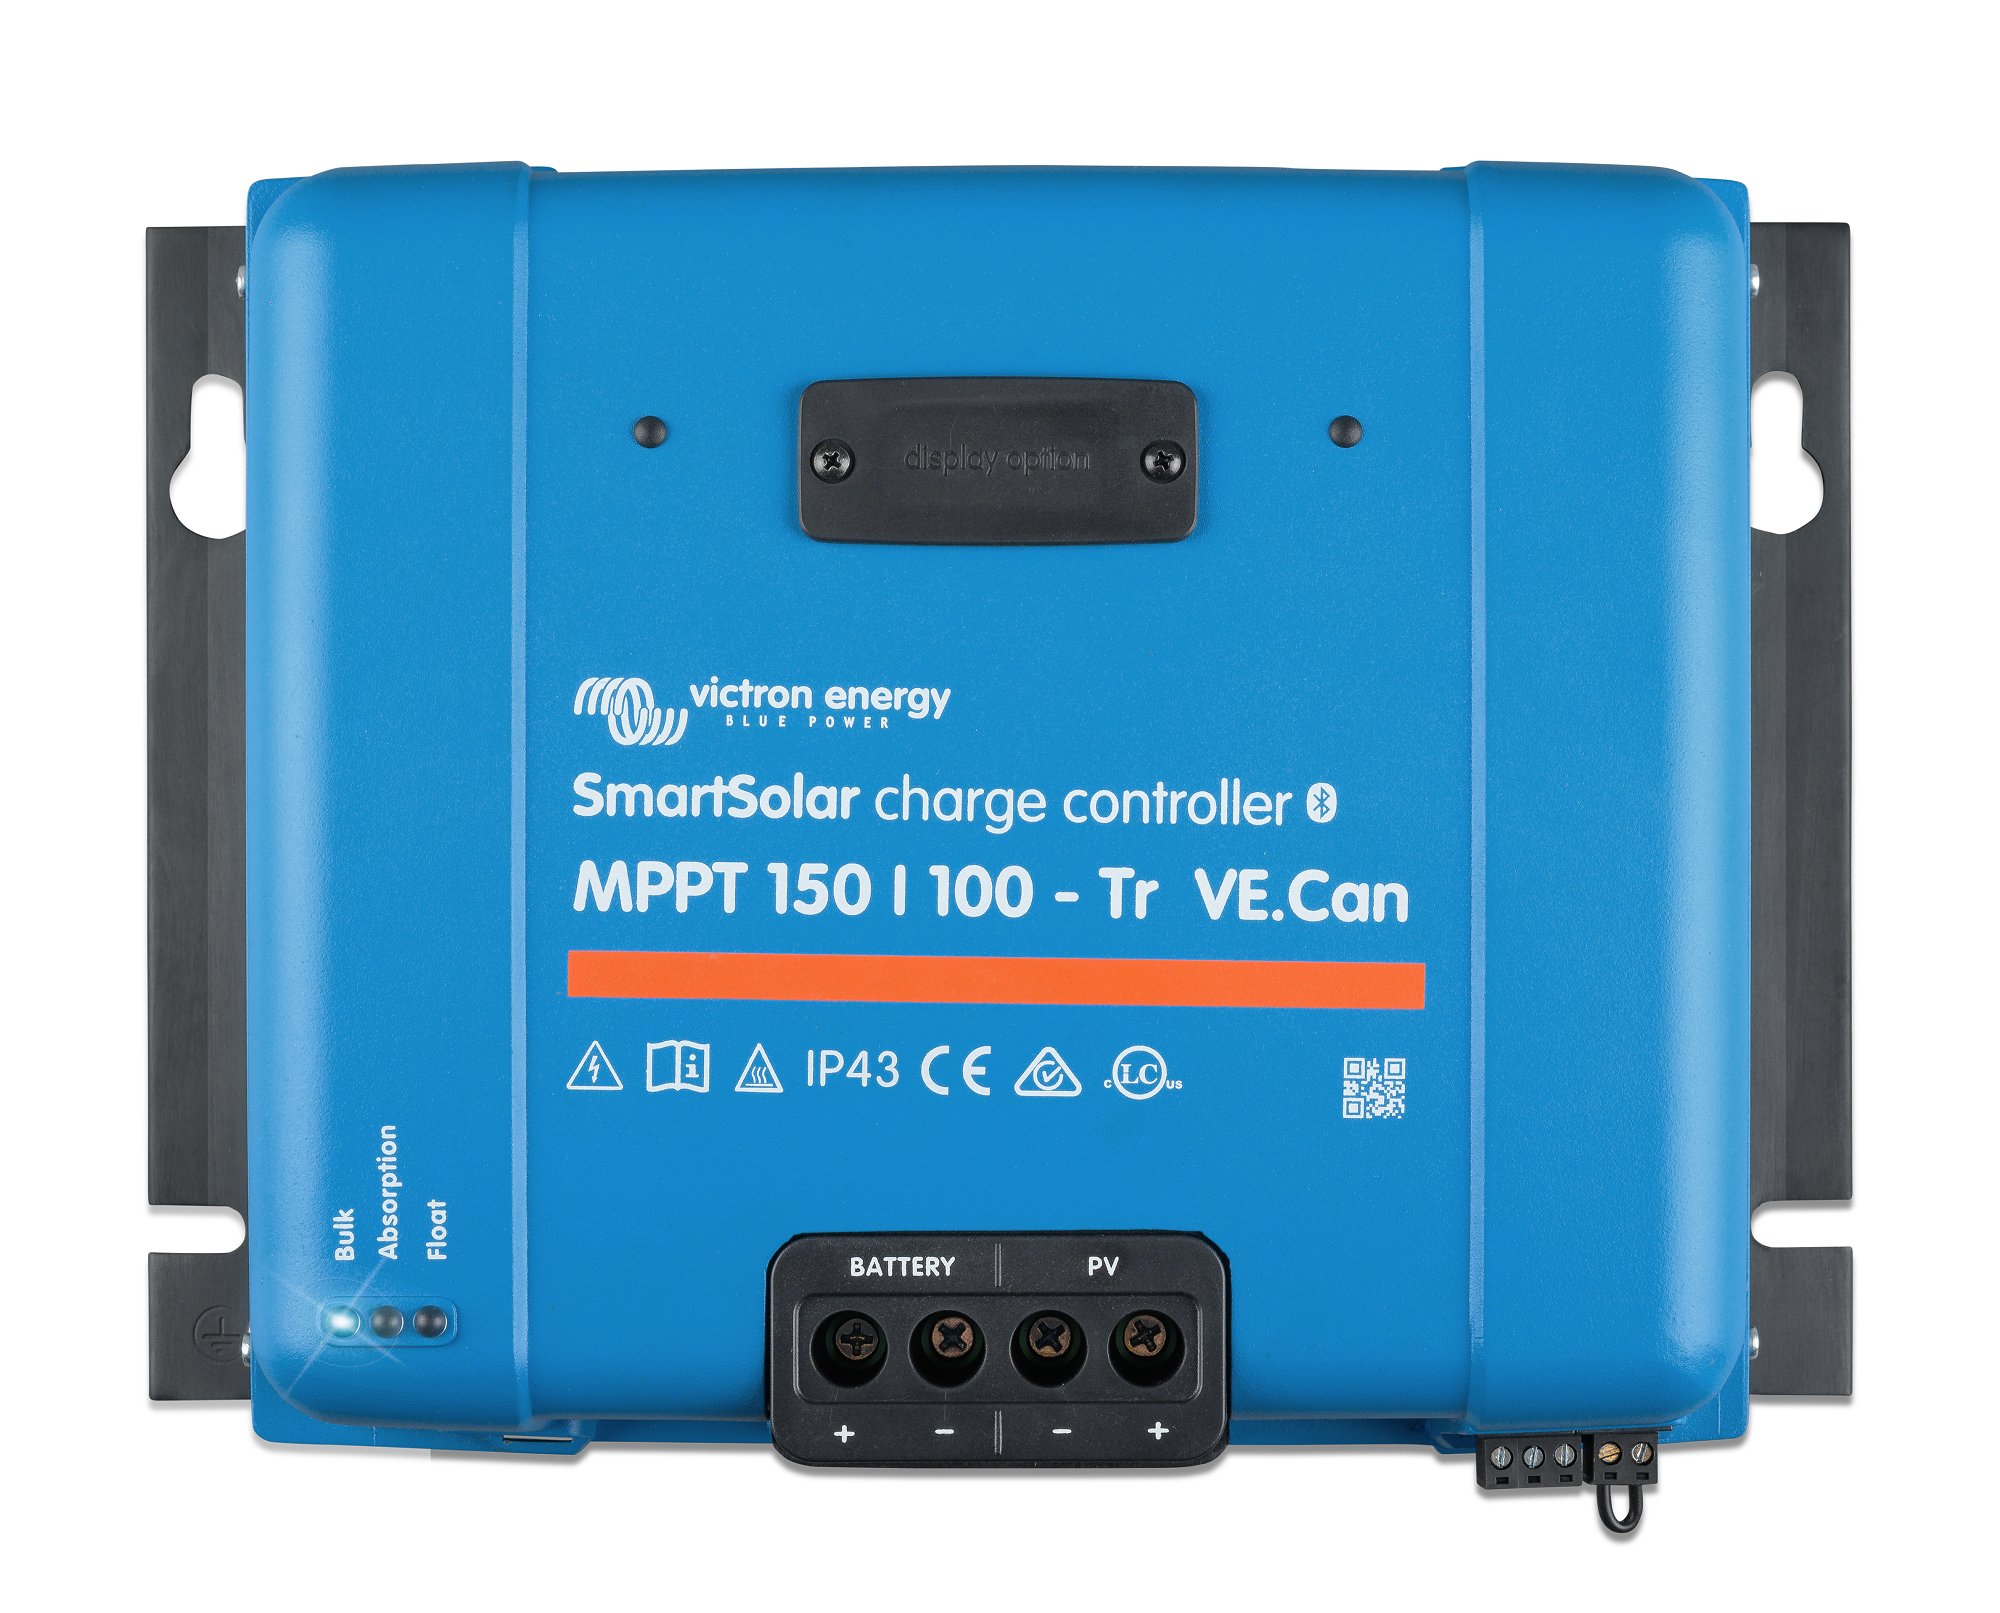 Is the 150/100 charge controller an MPPT controller?